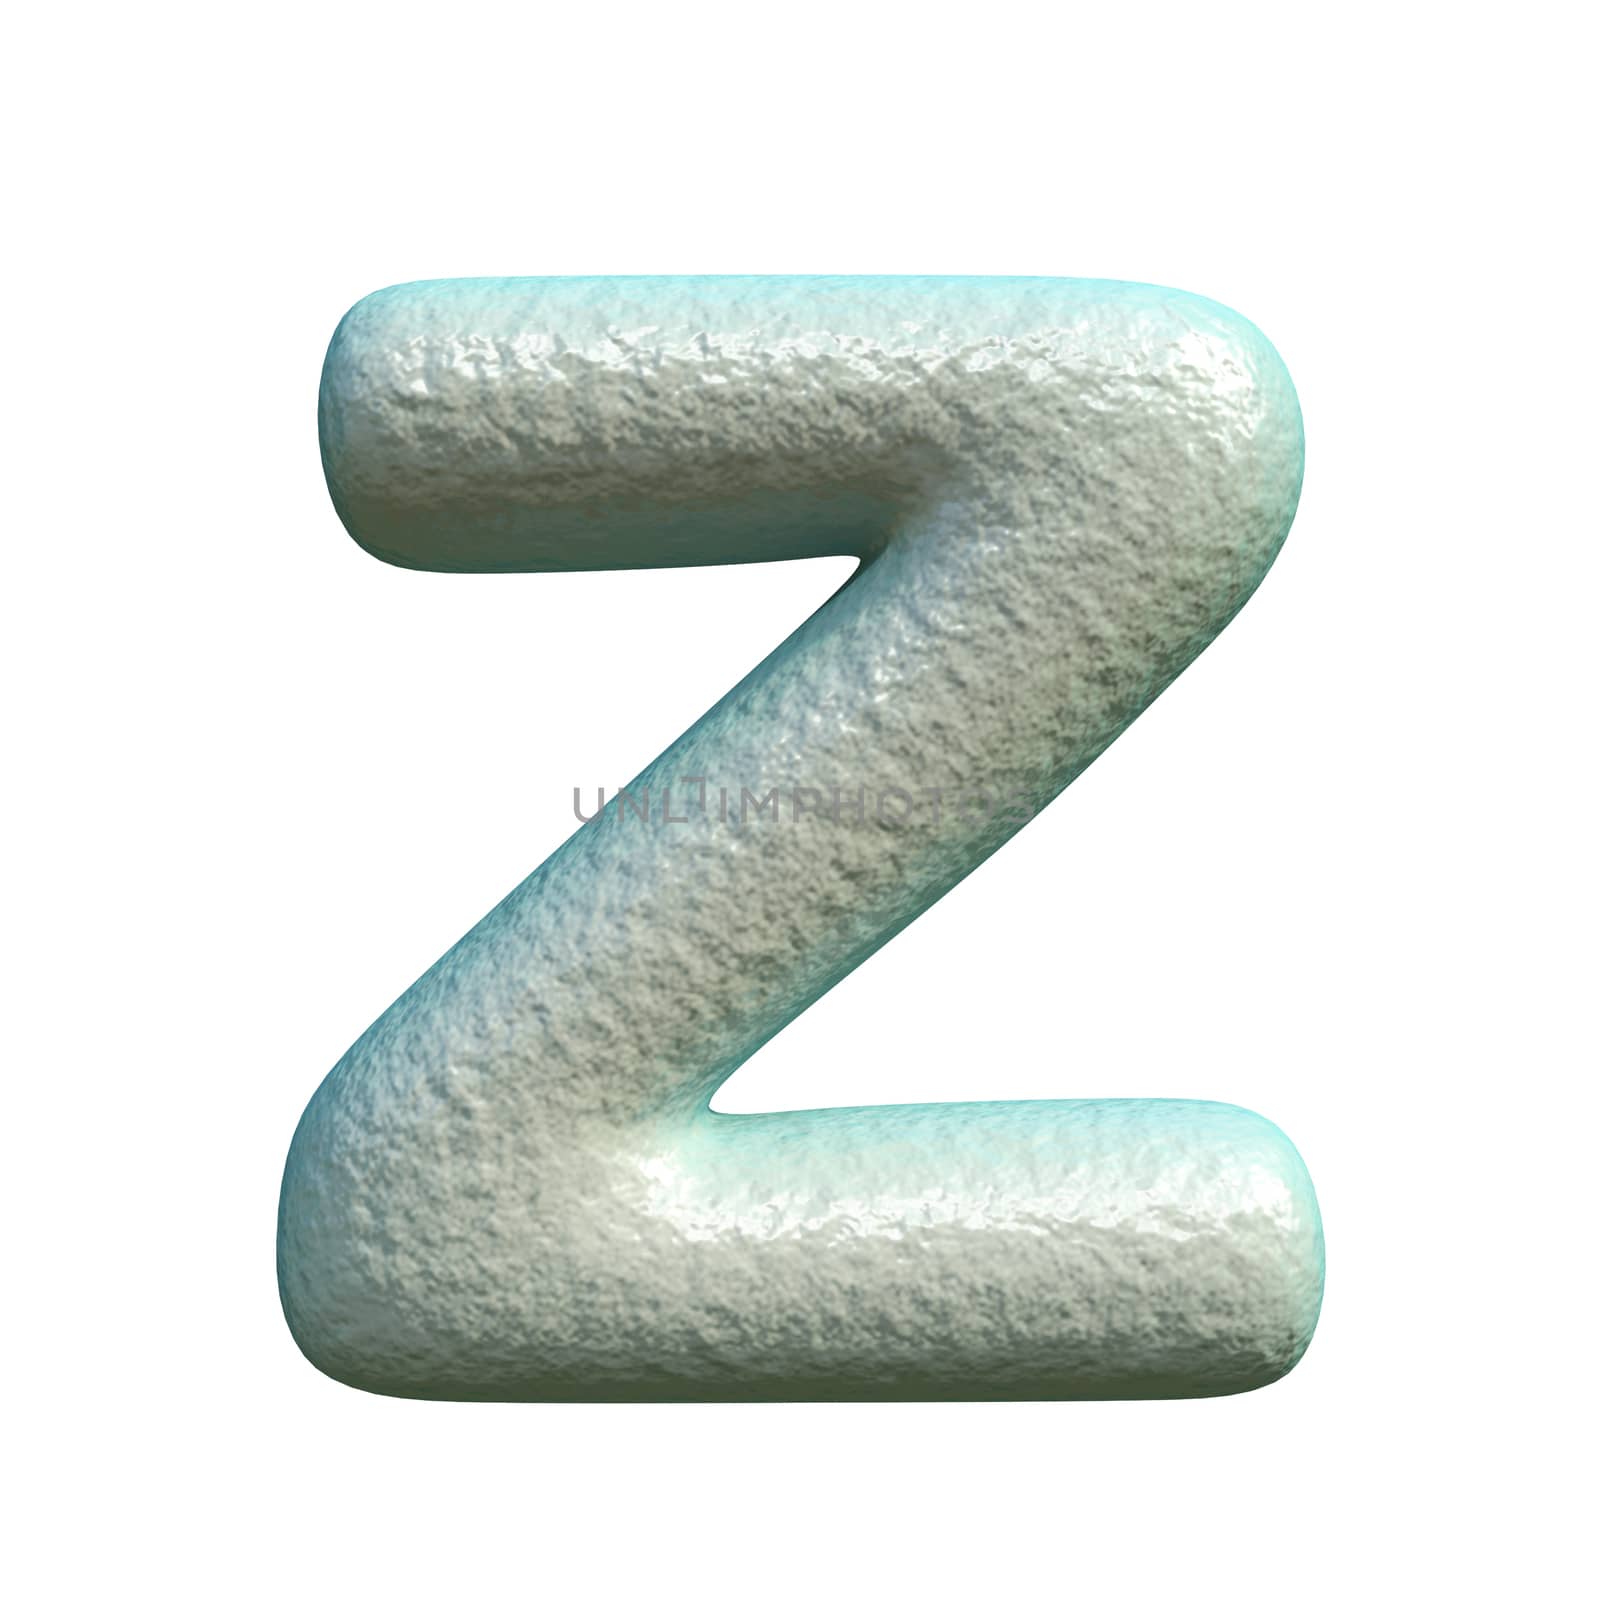 Grey blue clay font Letter Z 3D rendering illustration isolated on white background